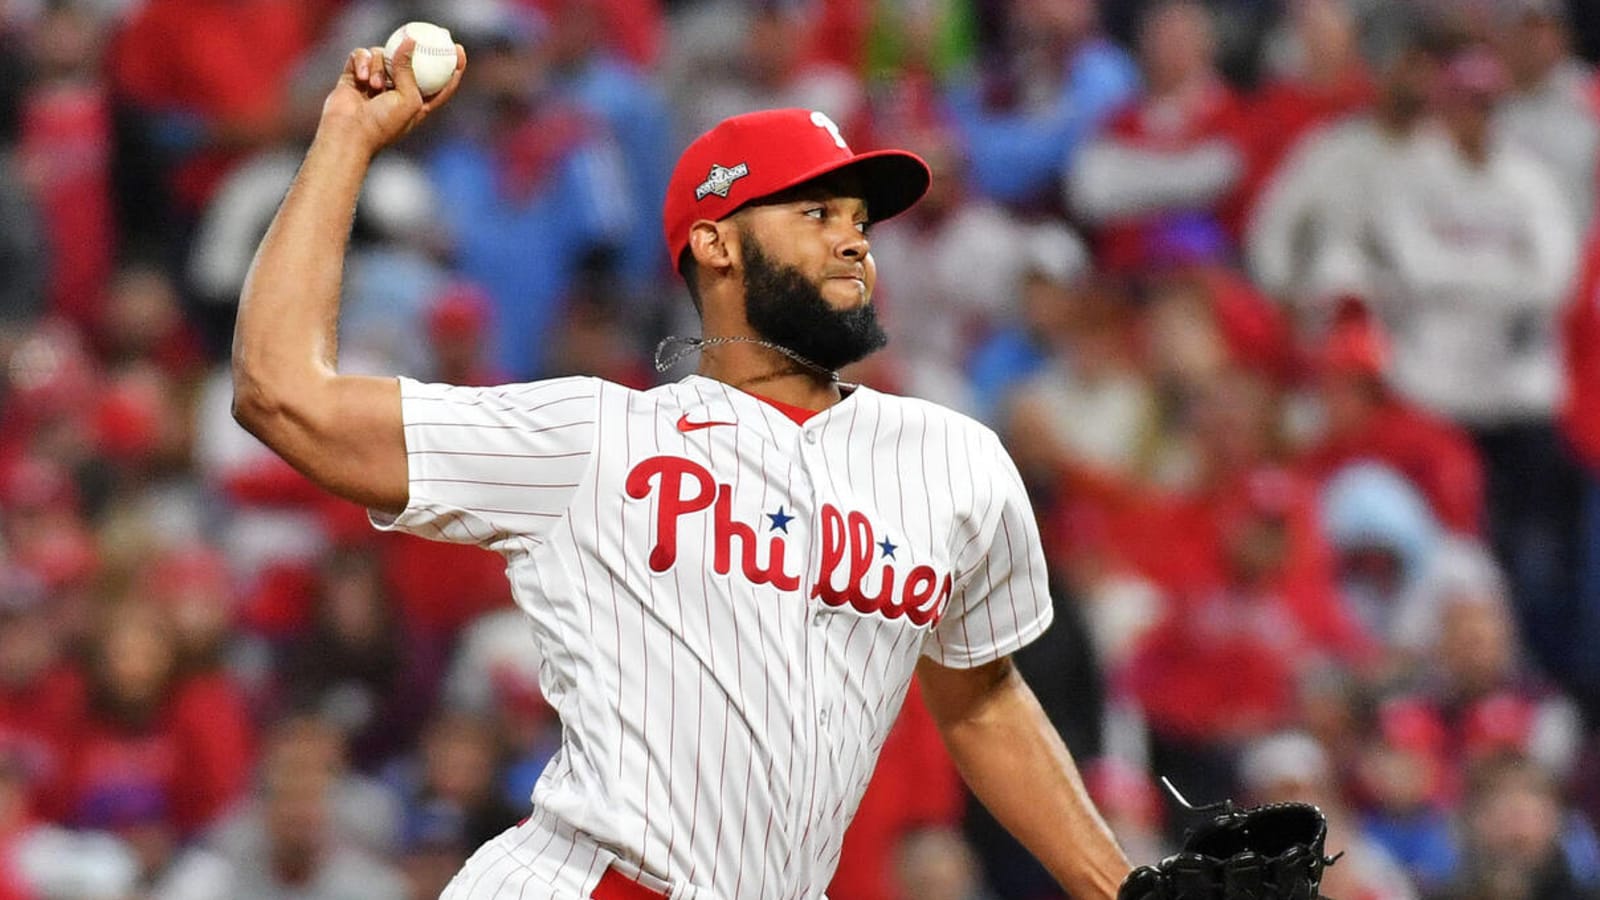 After hot start, Phillies stagger to Game 1 win over Diamondbacks